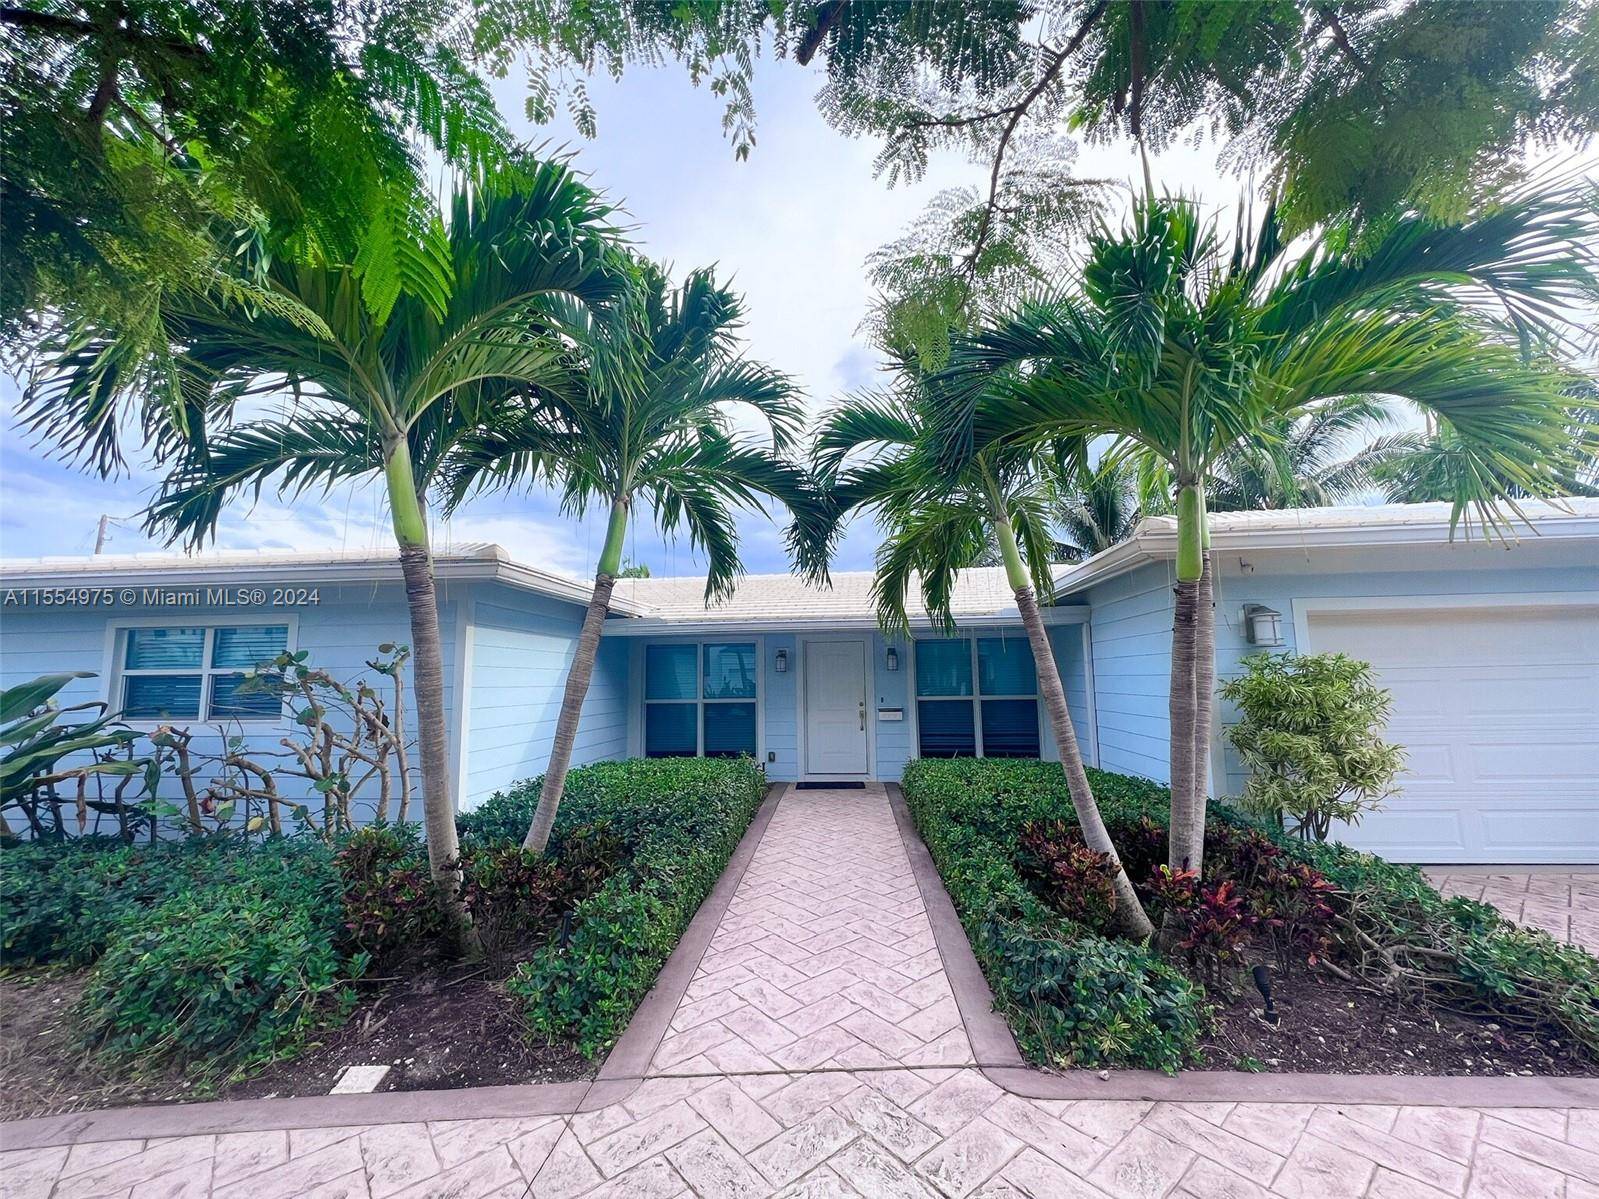 SHORT TERM Welcome to this private luxurious 3bed, 2bath home located in the desirable neighborhood of Lighthouse Point, FL.